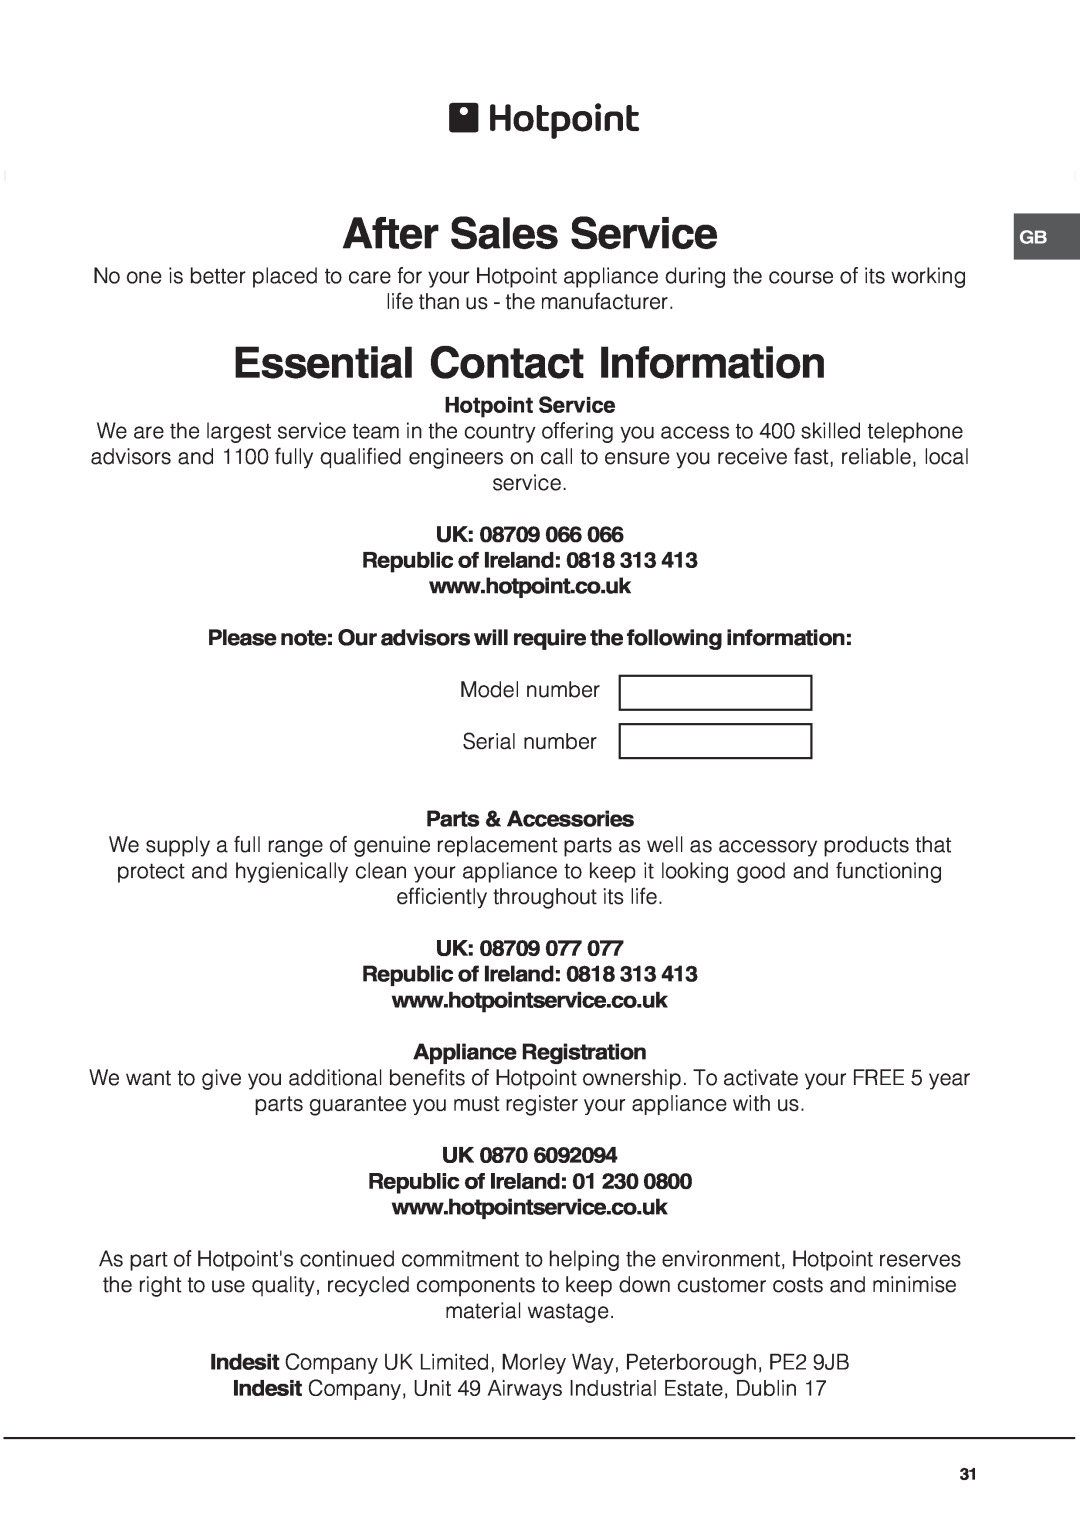 Hotpoint EG1000GX, EG1000EX installation instructions After Sales Service, Essential Contact Information 